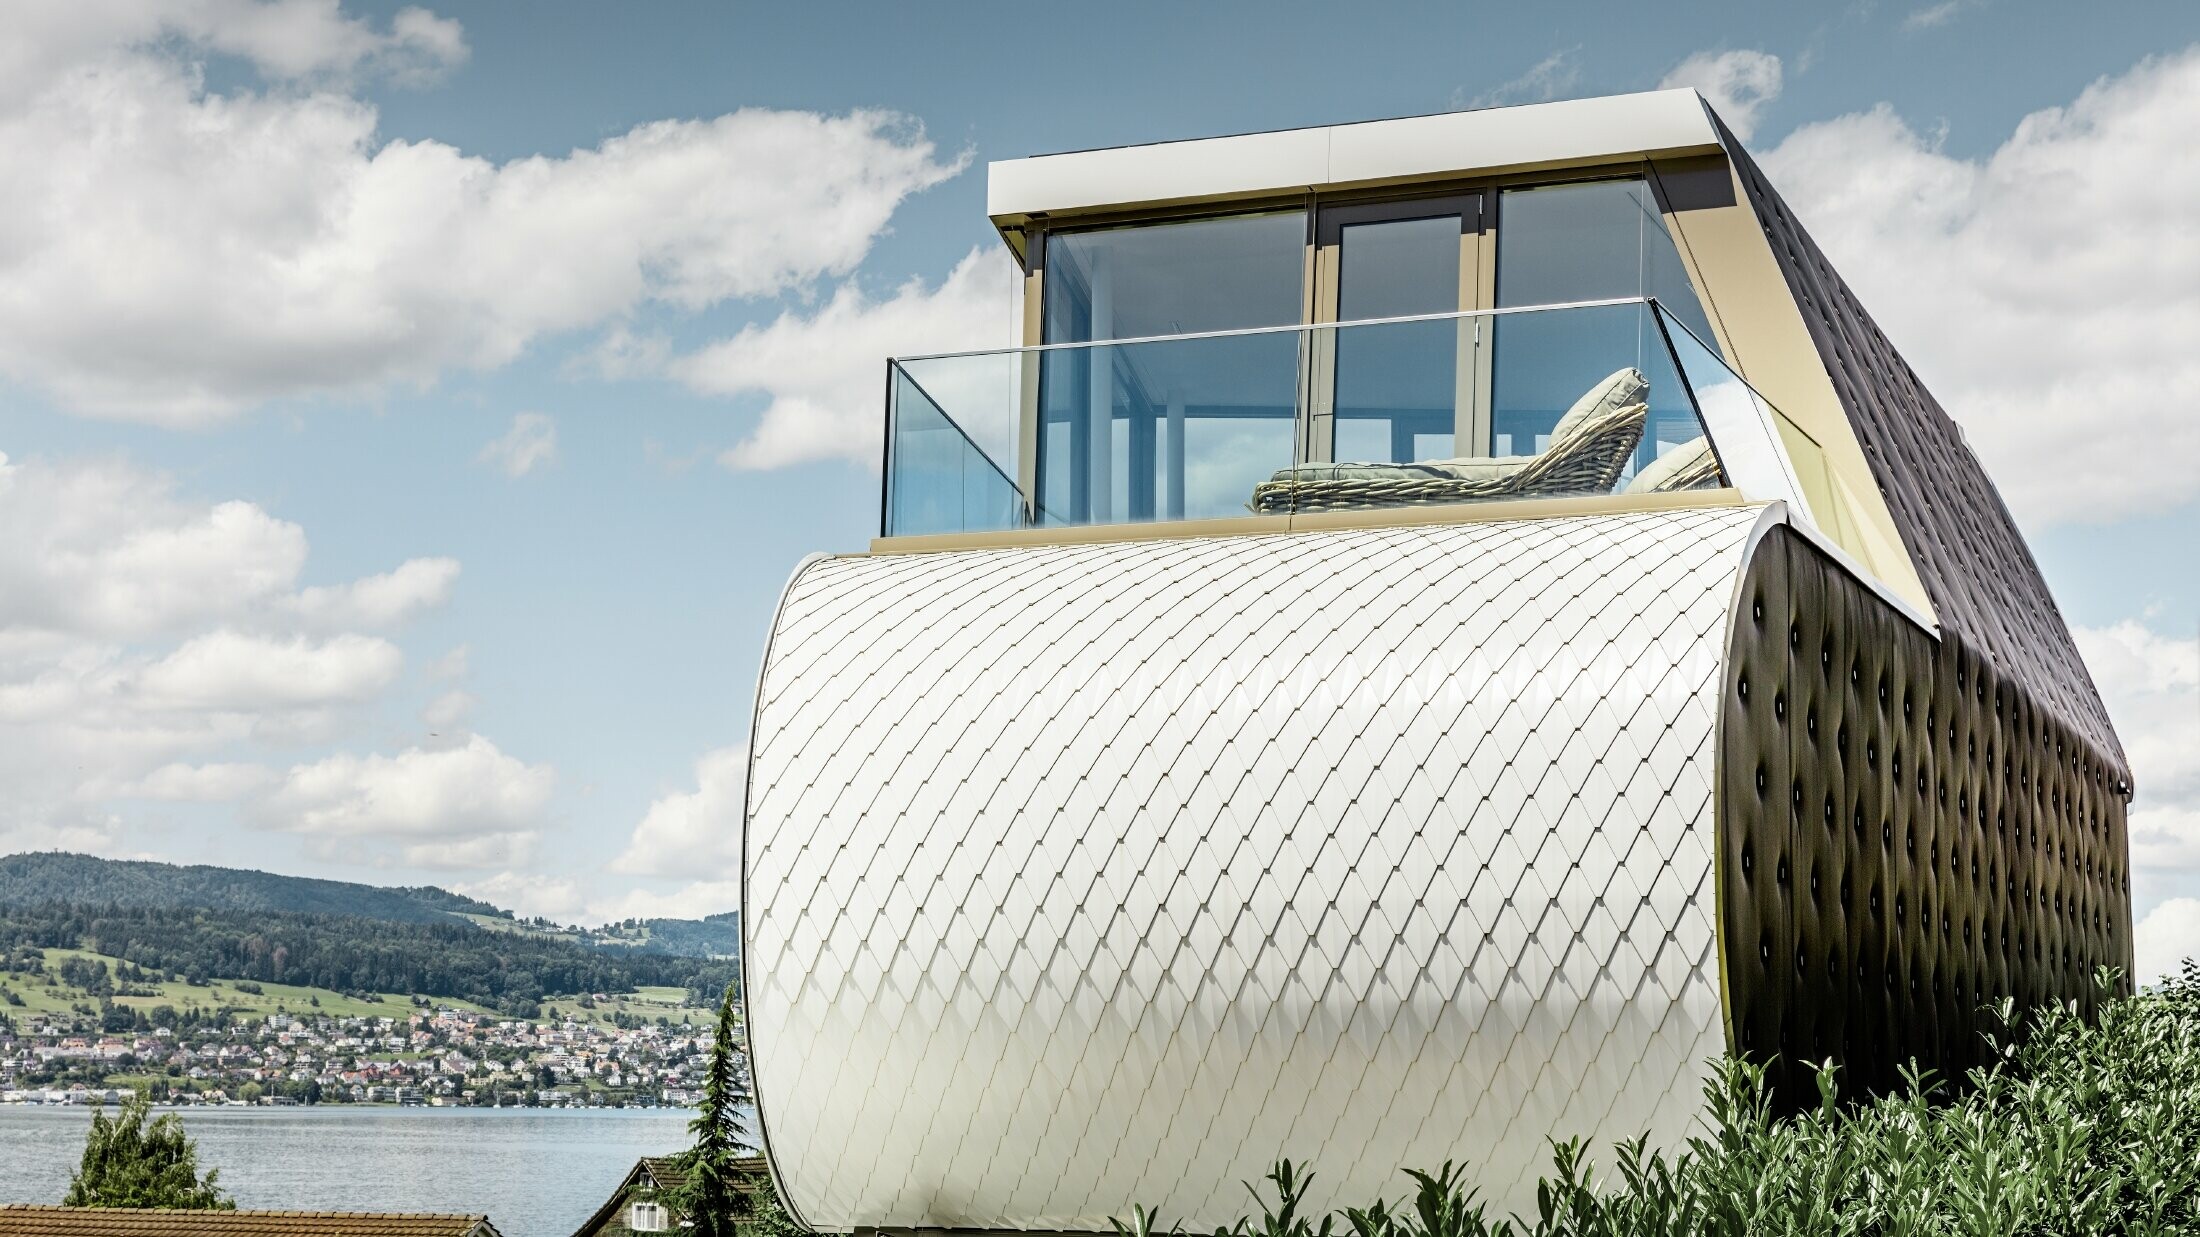 Side view of the excellent Flexhouse, designed by the architect Camenzind; you can see one of the curved exterior walls, which is clad with PREFA’s scale-like aluminium façade in pure white.